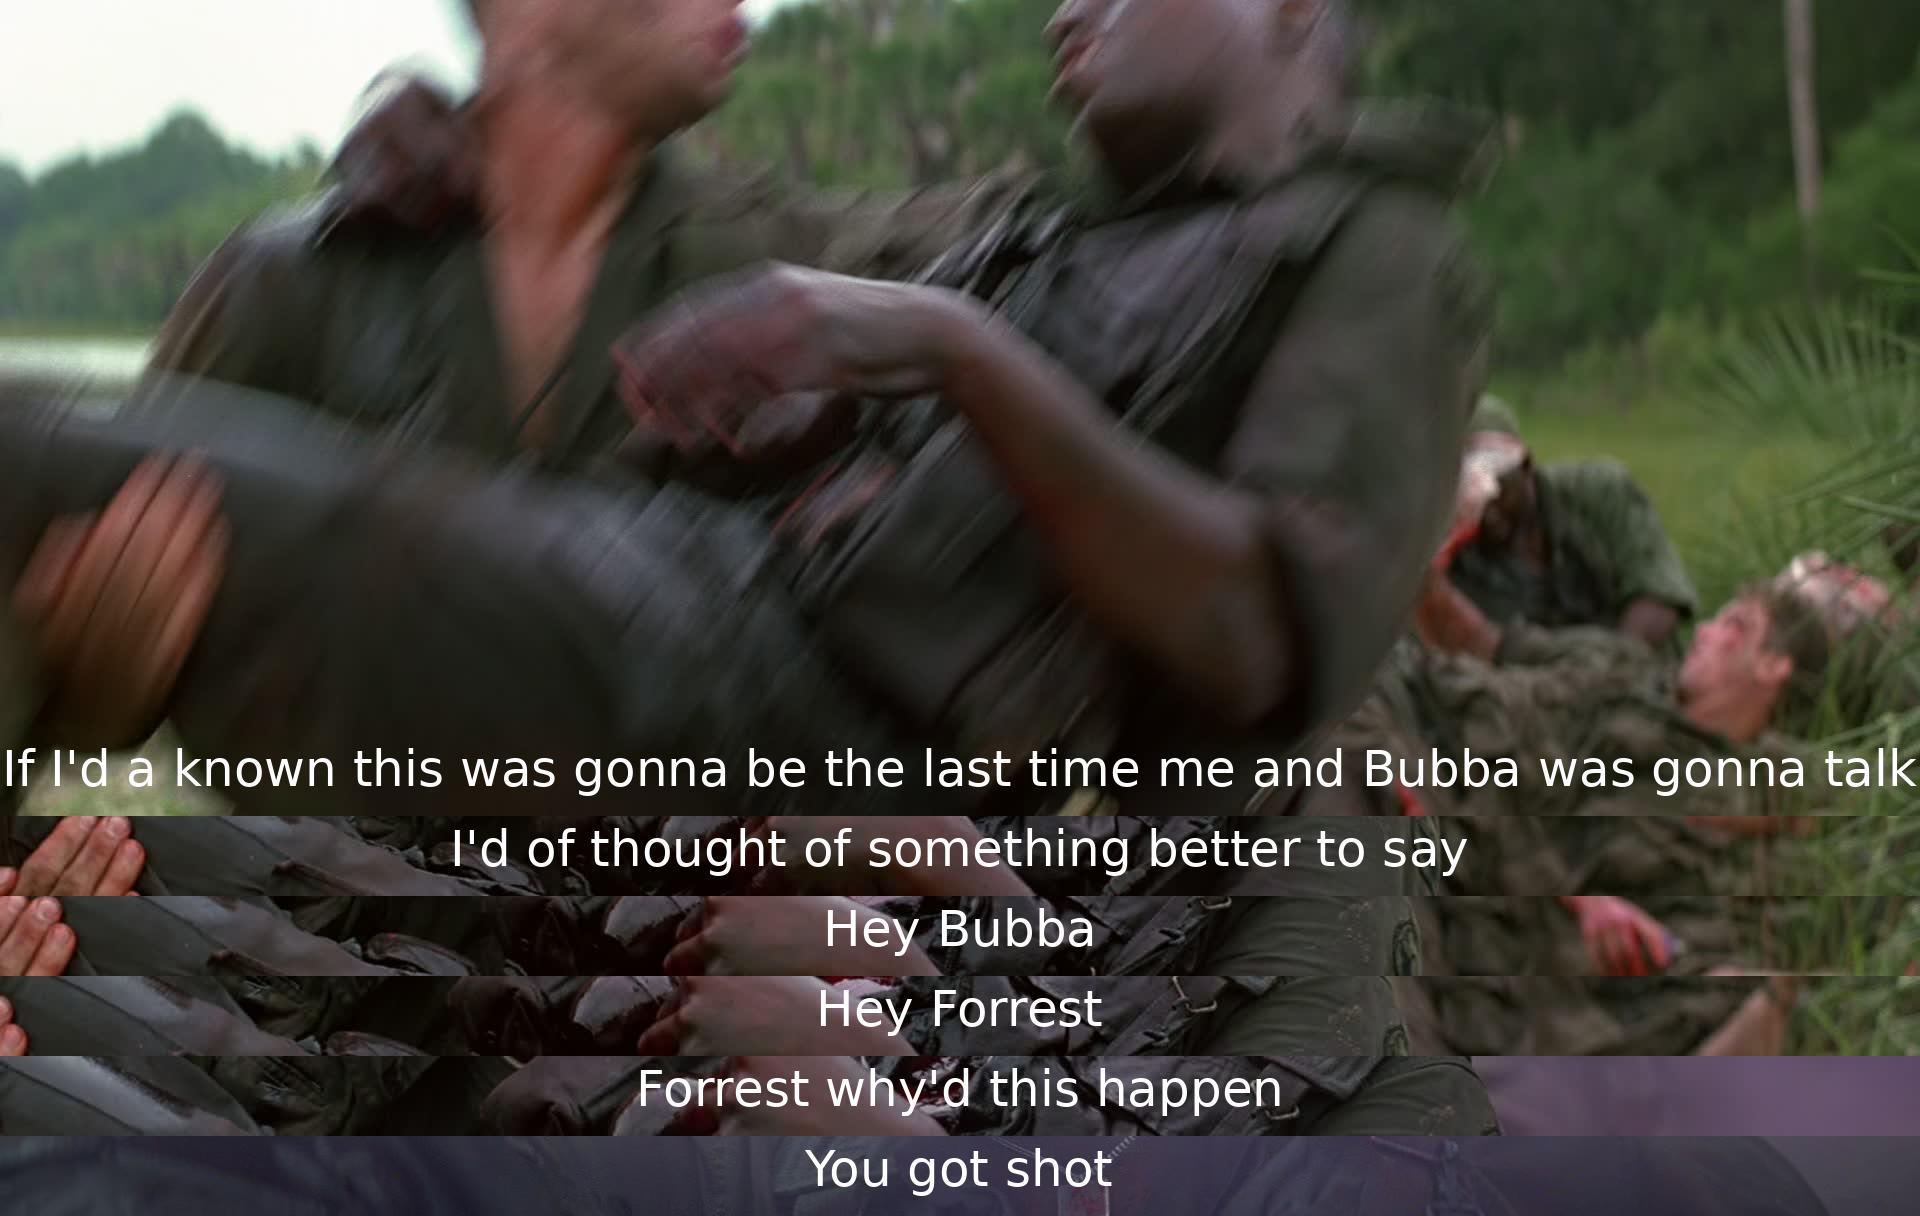 Two characters, Forrest and Bubba, share a poignant conversation. Forrest wishes he had said something profound during their last talk. Bubba asks why he got shot, showing concern. Their interaction is brief yet impactful, touching on themes of regret and tragedy.